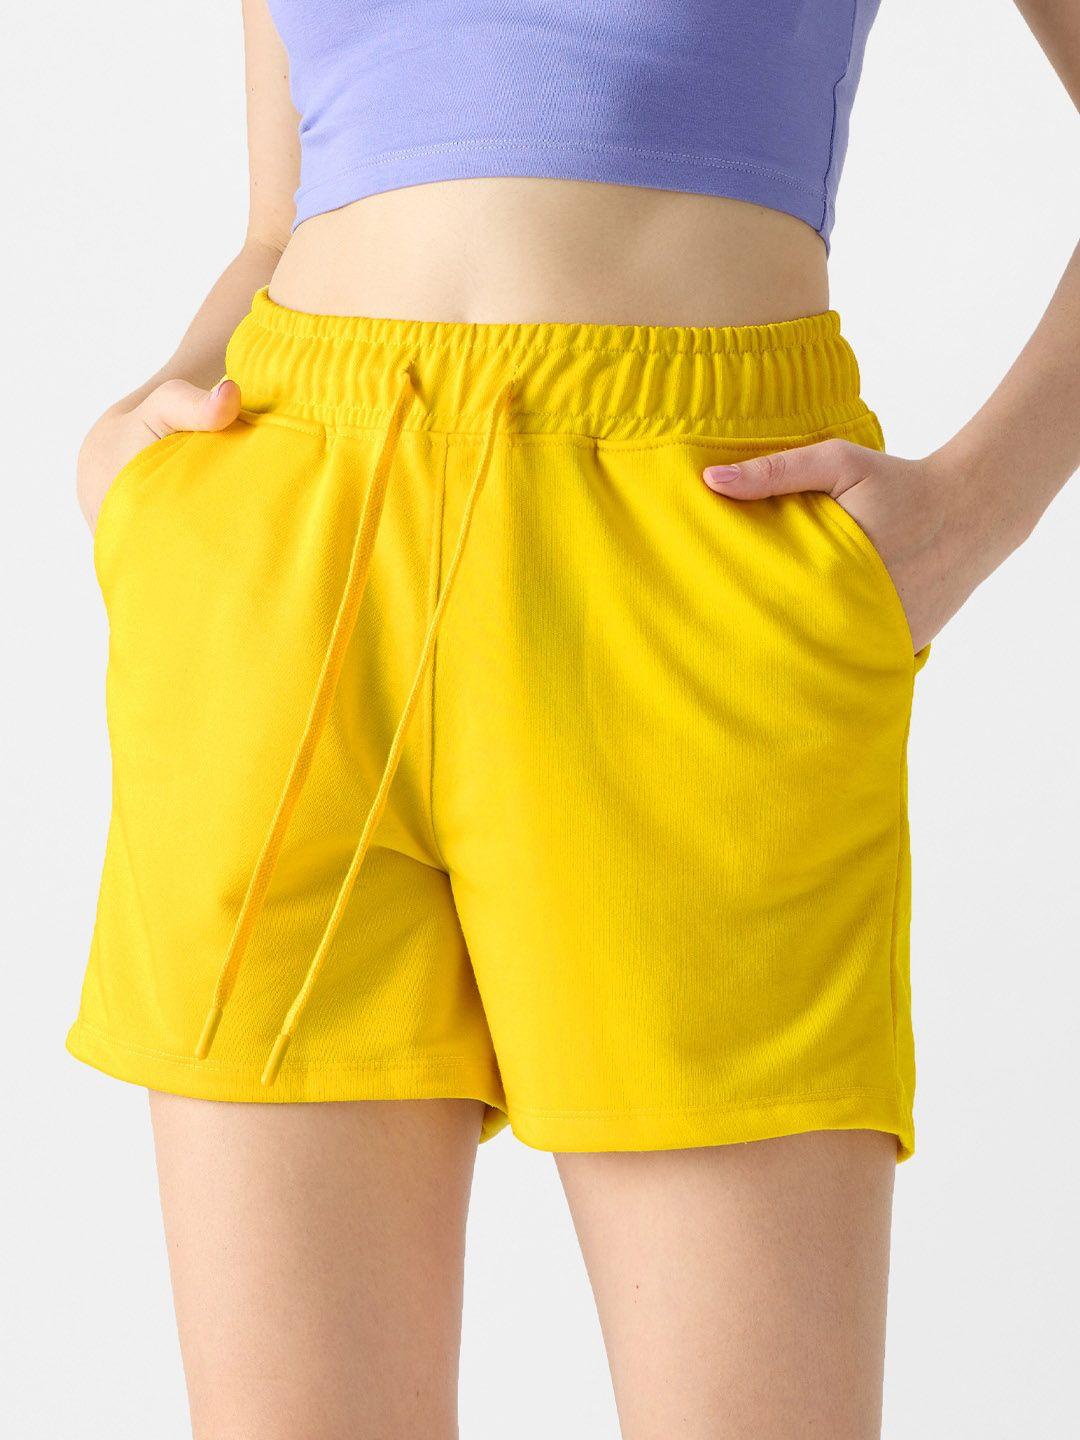 the-souled-store-women-mid-rise-pure-cotton-regular-shorts